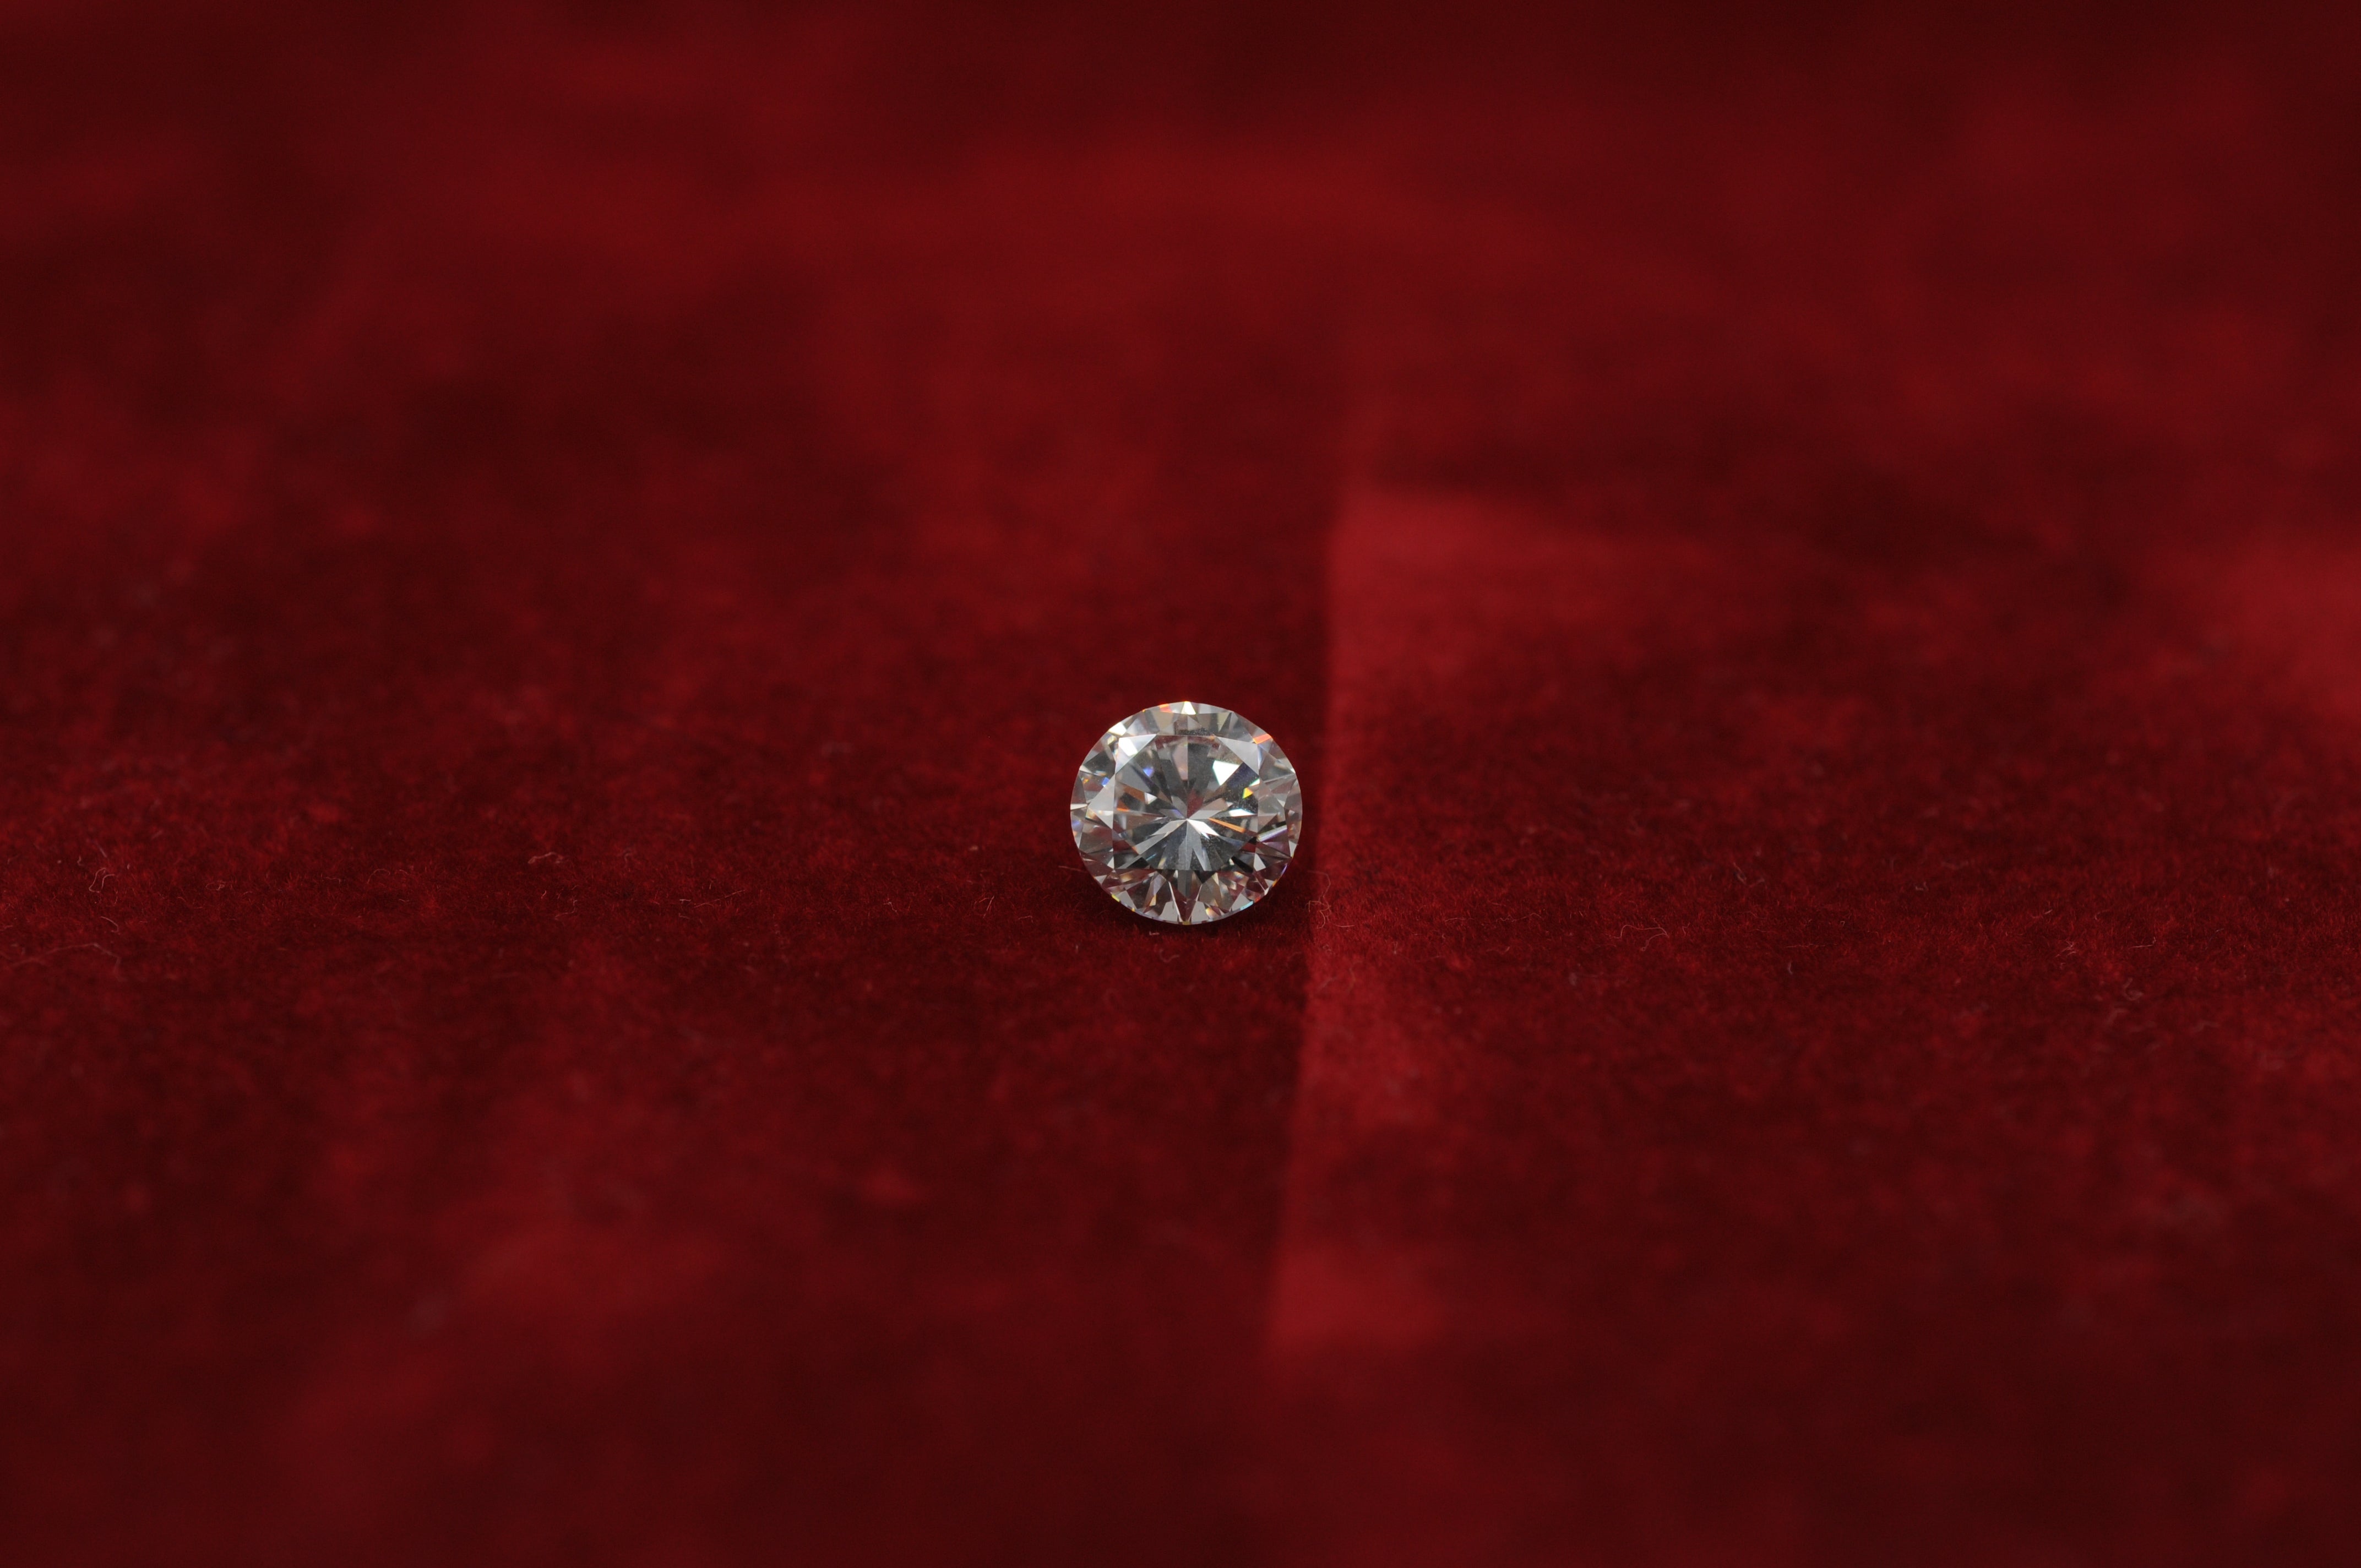 Indulge in the allure of this breathtaking diamond, a Brilliant cut gem with a weight of 1.02 carats. Impeccably graded by HRD, this diamond boasts exceptional qualities that define its beauty:

Diamond Details:
Shape: Brilliant
Weight: 1.02